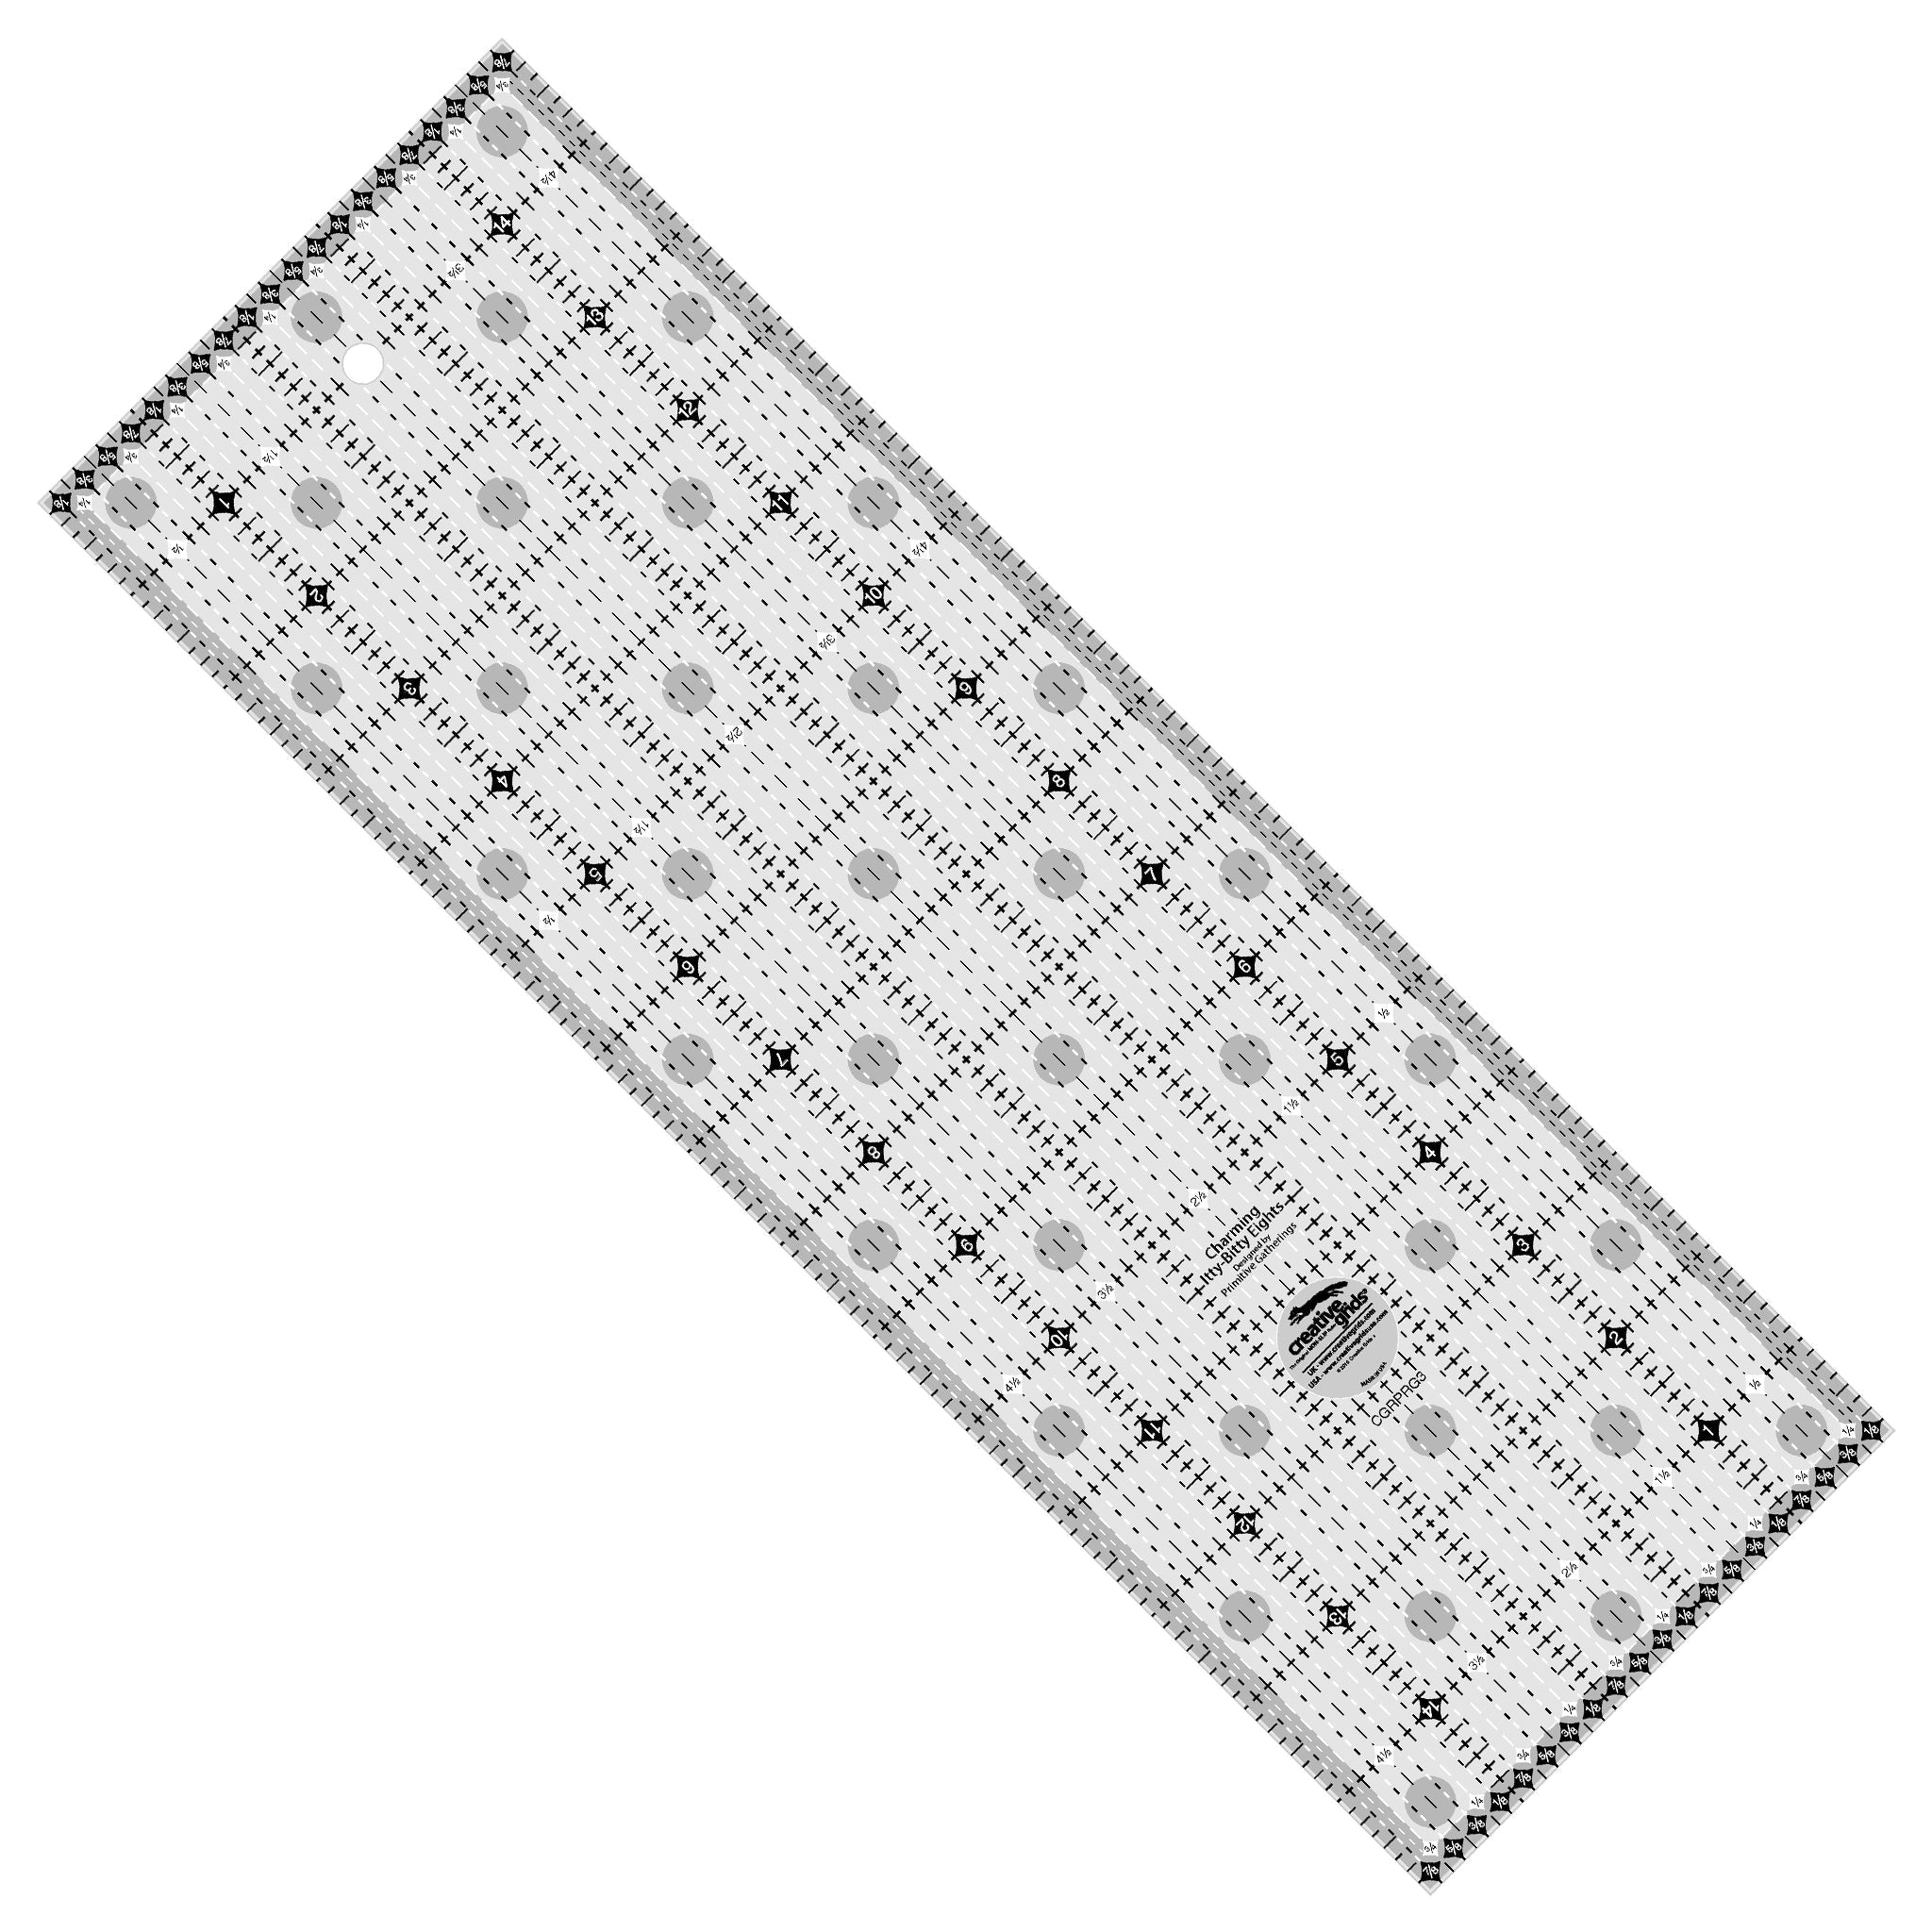 Creative Grids Quilting Ruler 8 1/2in x 24 1/2in CGR824